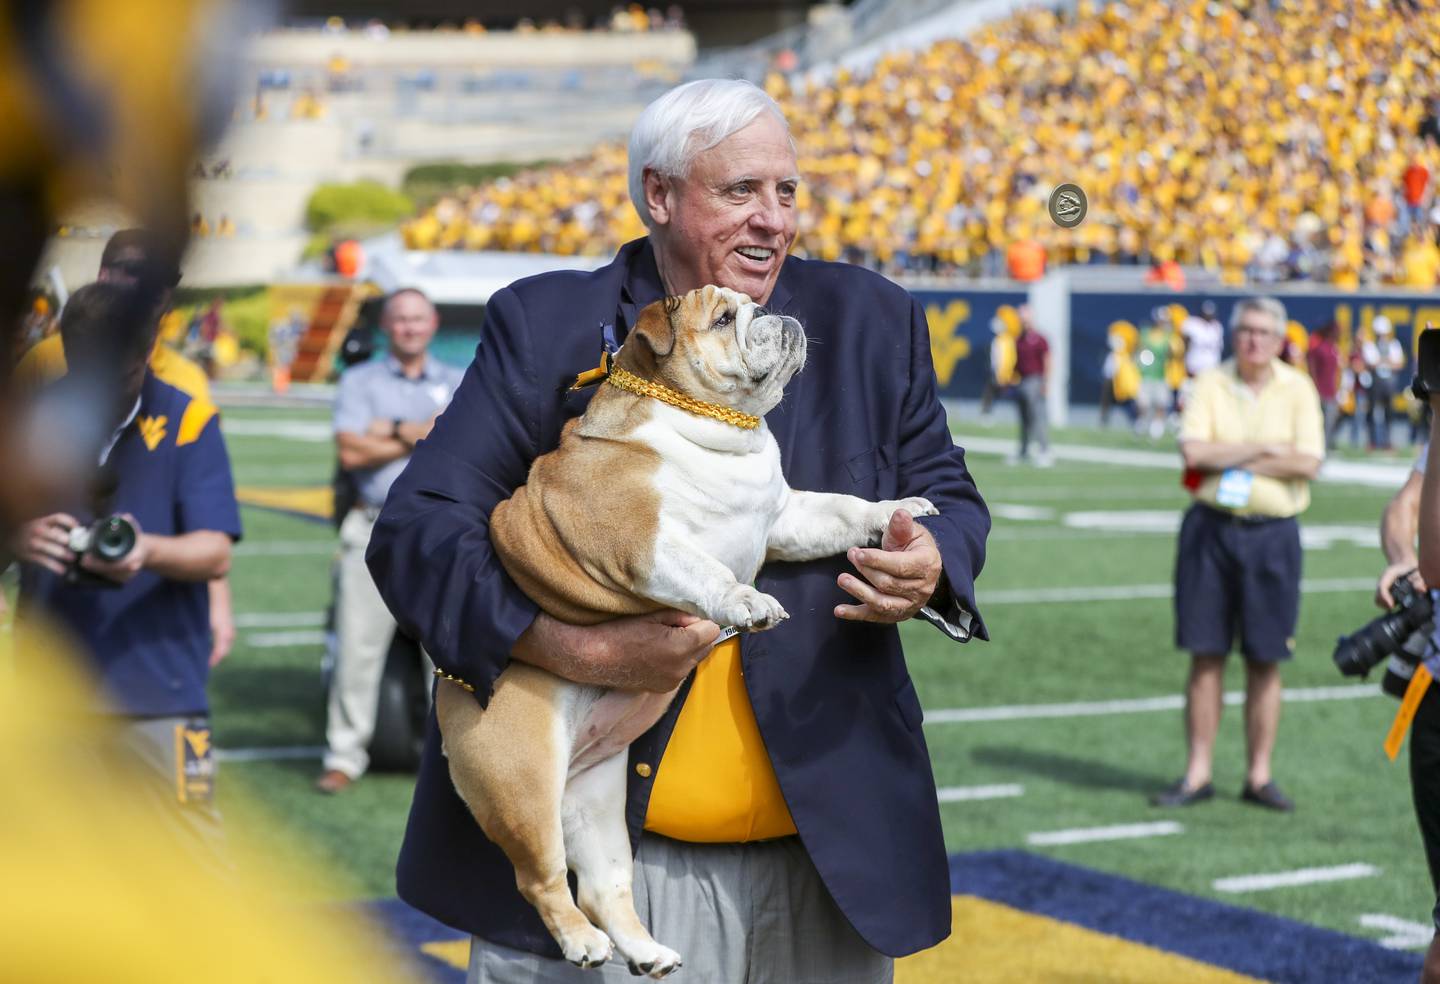 Jim Justice and his dog, Babydog, flip the coin to begin the American football game at Mountaineer Field at Milan Puskar Stadium. Phot: USA TODAY Sports